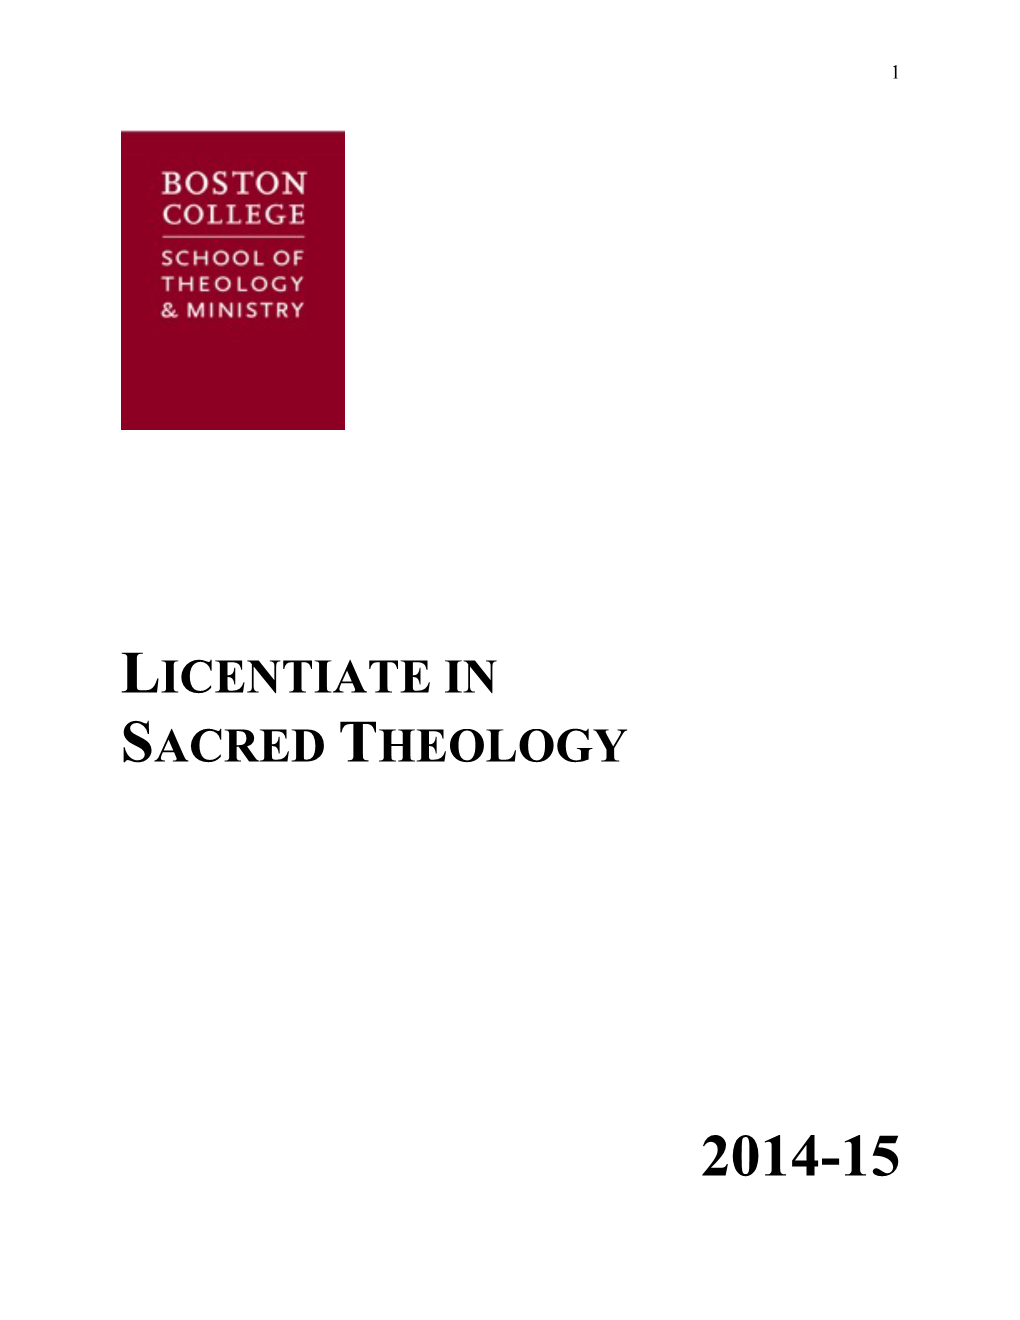 Licentiate in Sacred Theology